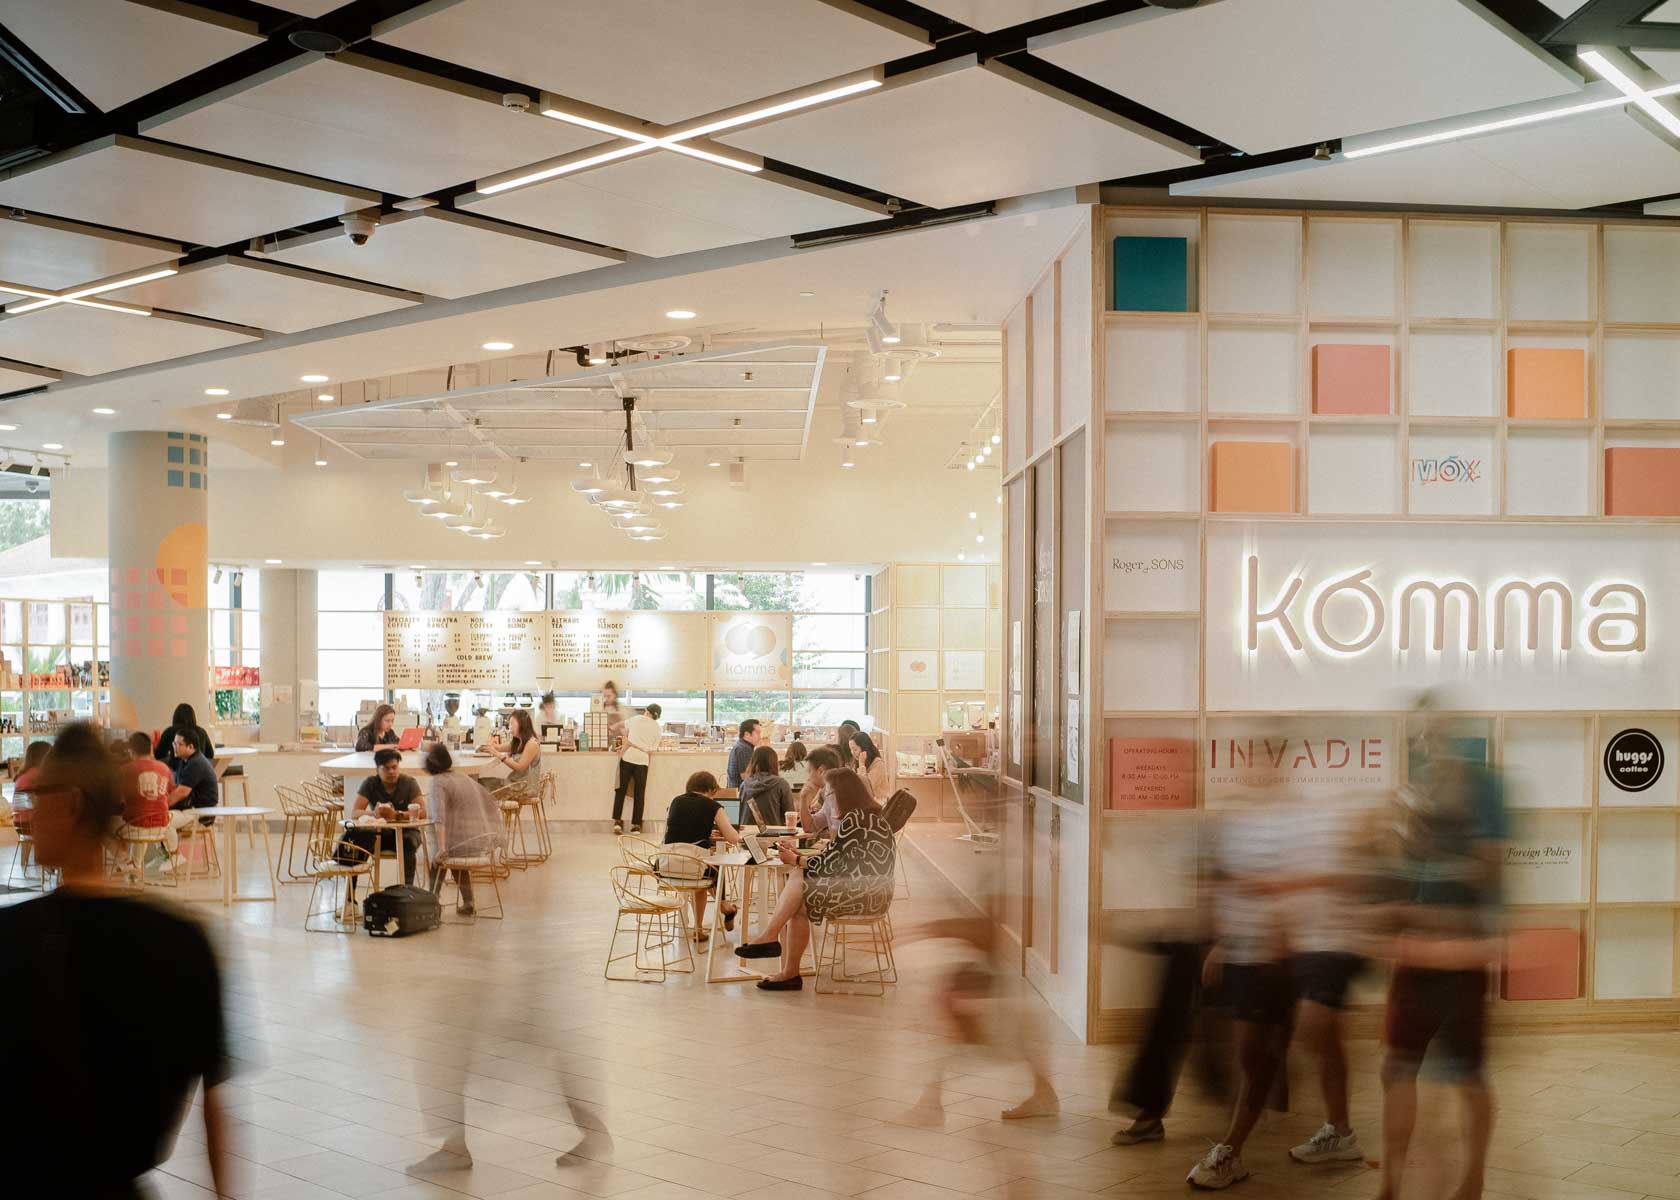 A cafe and retail space for kómma - Roger&Sons